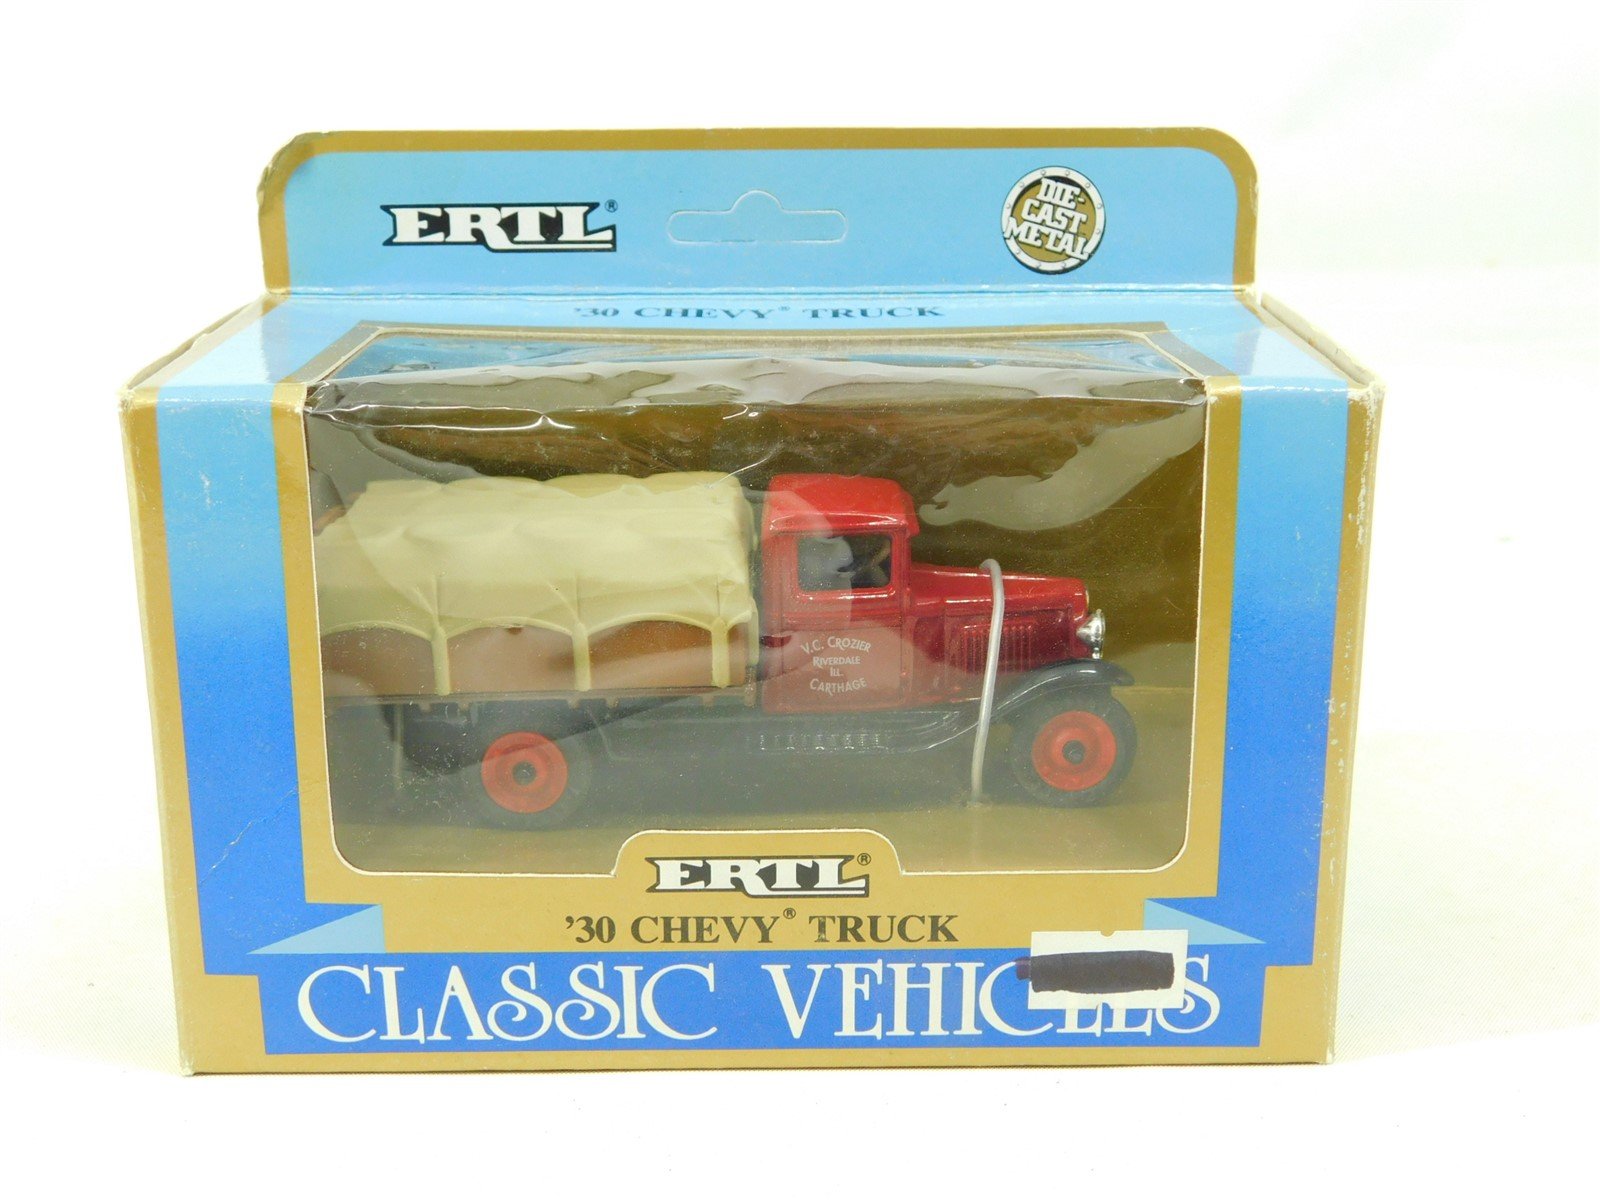 1:43 Scale Ertl Classic Vehicles 2861 Die-Cast V.C. Crozier 1930 Chevy Truck